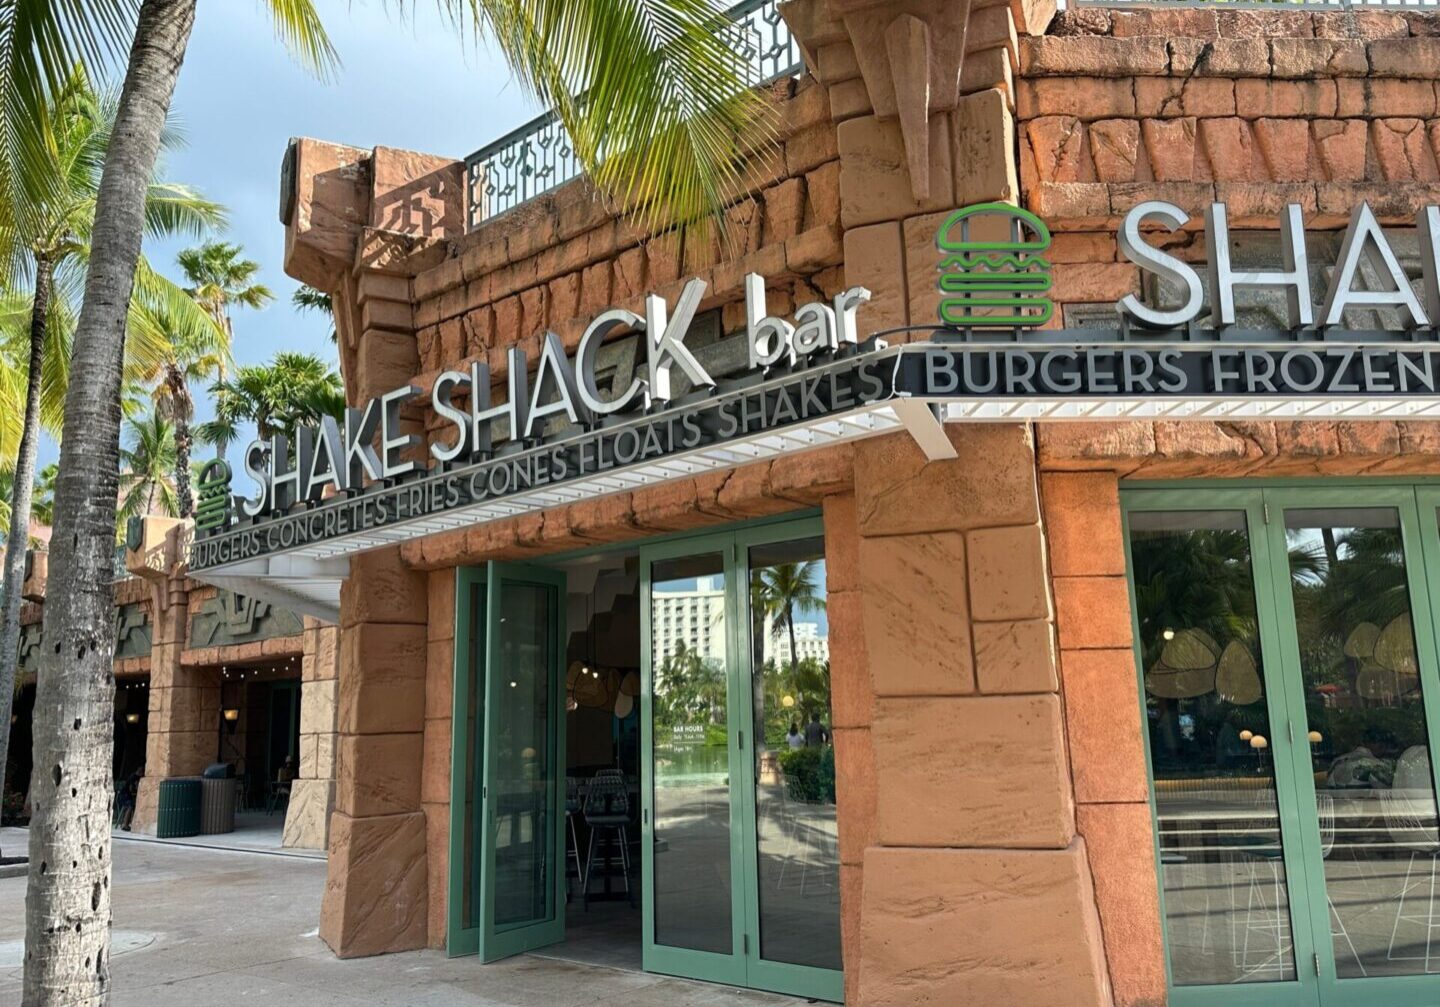 Shake shack bar and restaurant exterior with signage displaying menu offerings such as burgers and shakes.